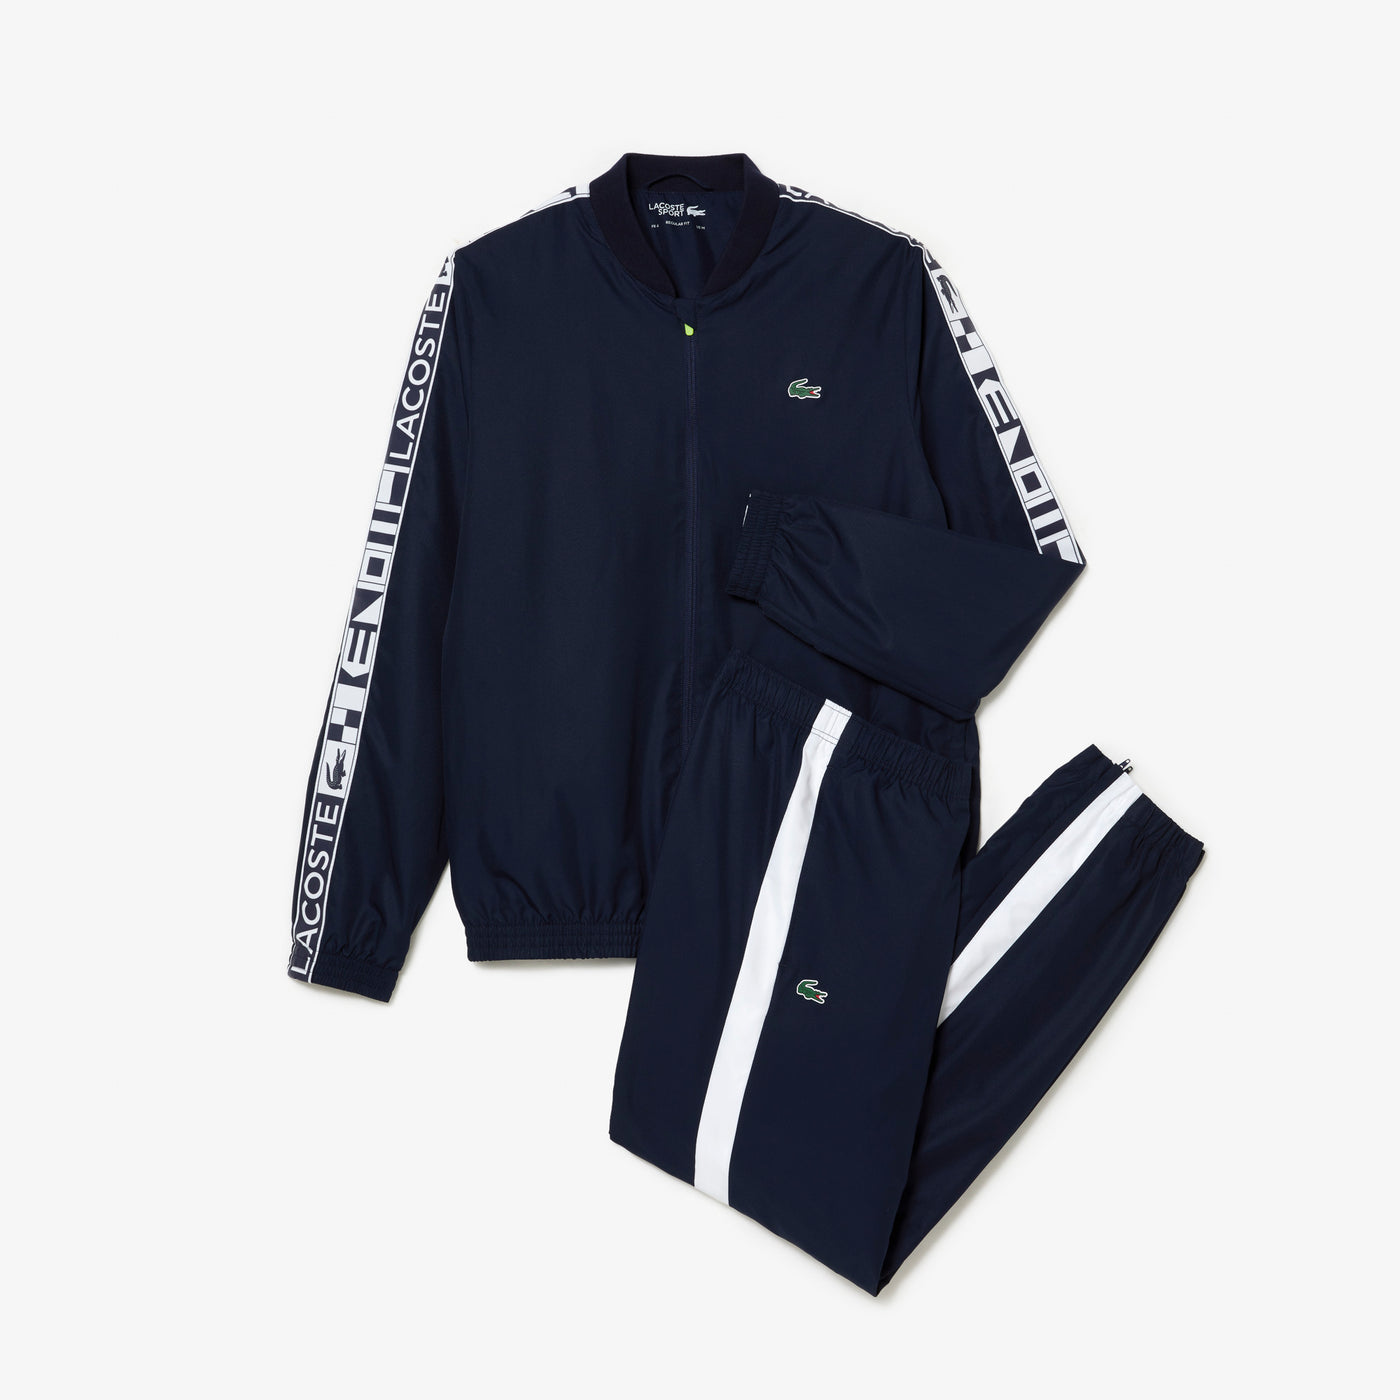 Shop The Latest Collection Of Lacoste Men'S Lacoste Sport Printed Tennis Tracksuit - Wh9404 In Lebanon